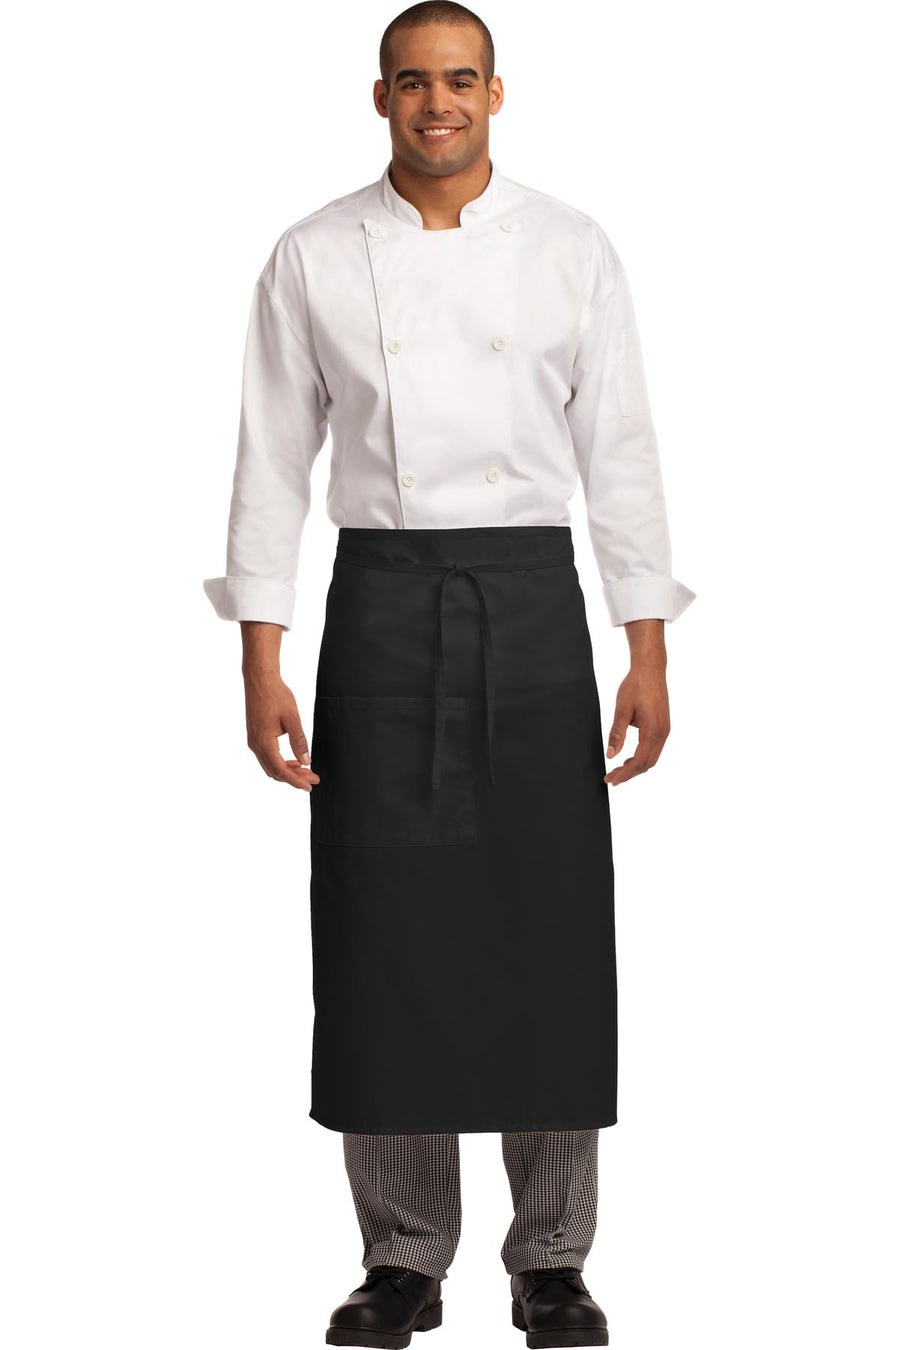 Port Authority Easy Care Full Bistro Apron with Stain Release.